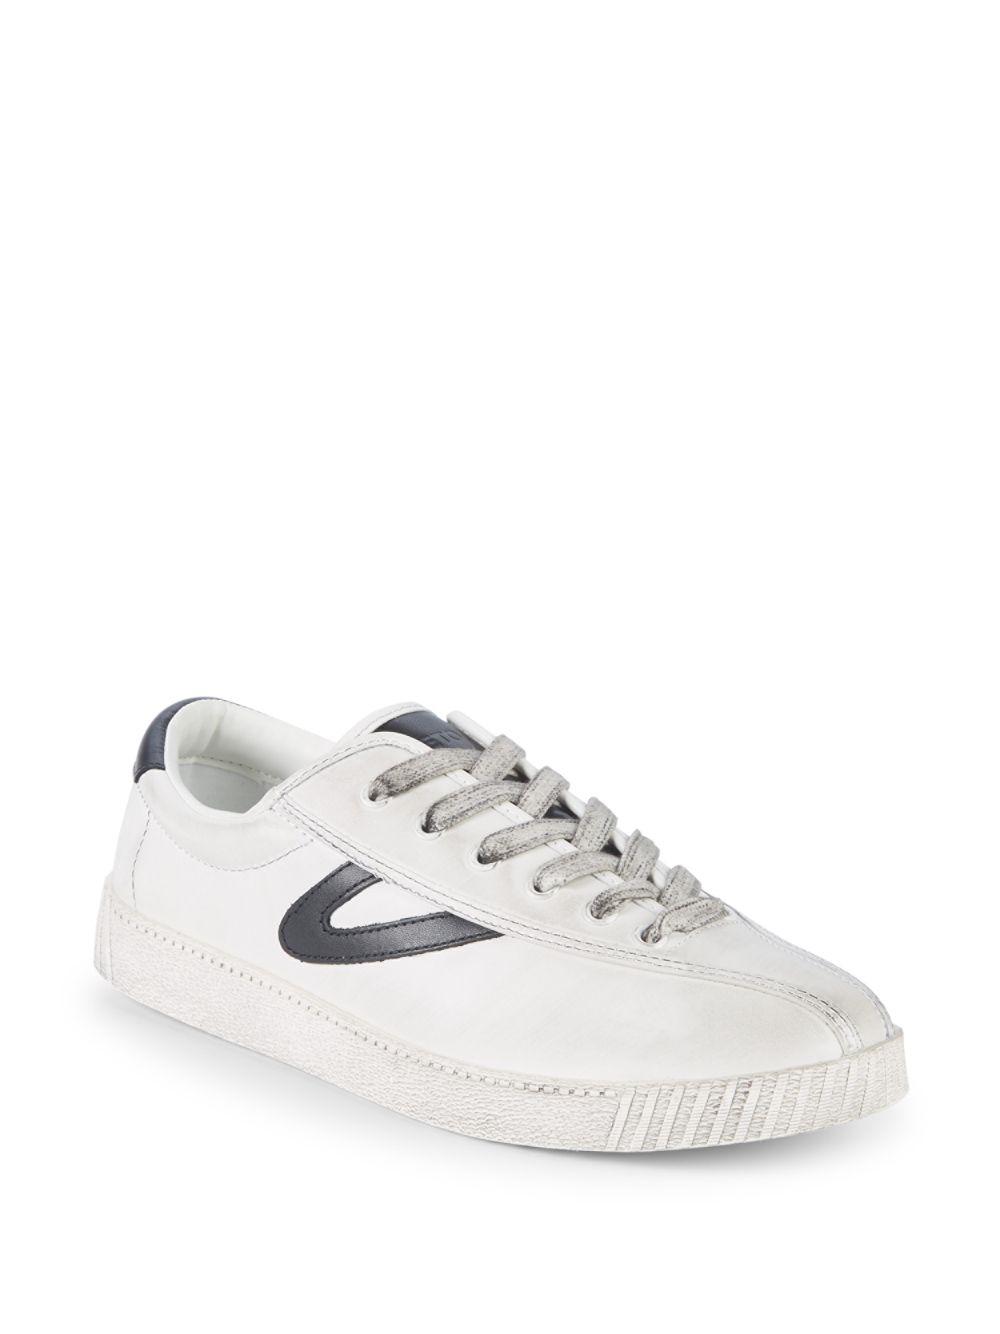 tretorn white leather sneakers